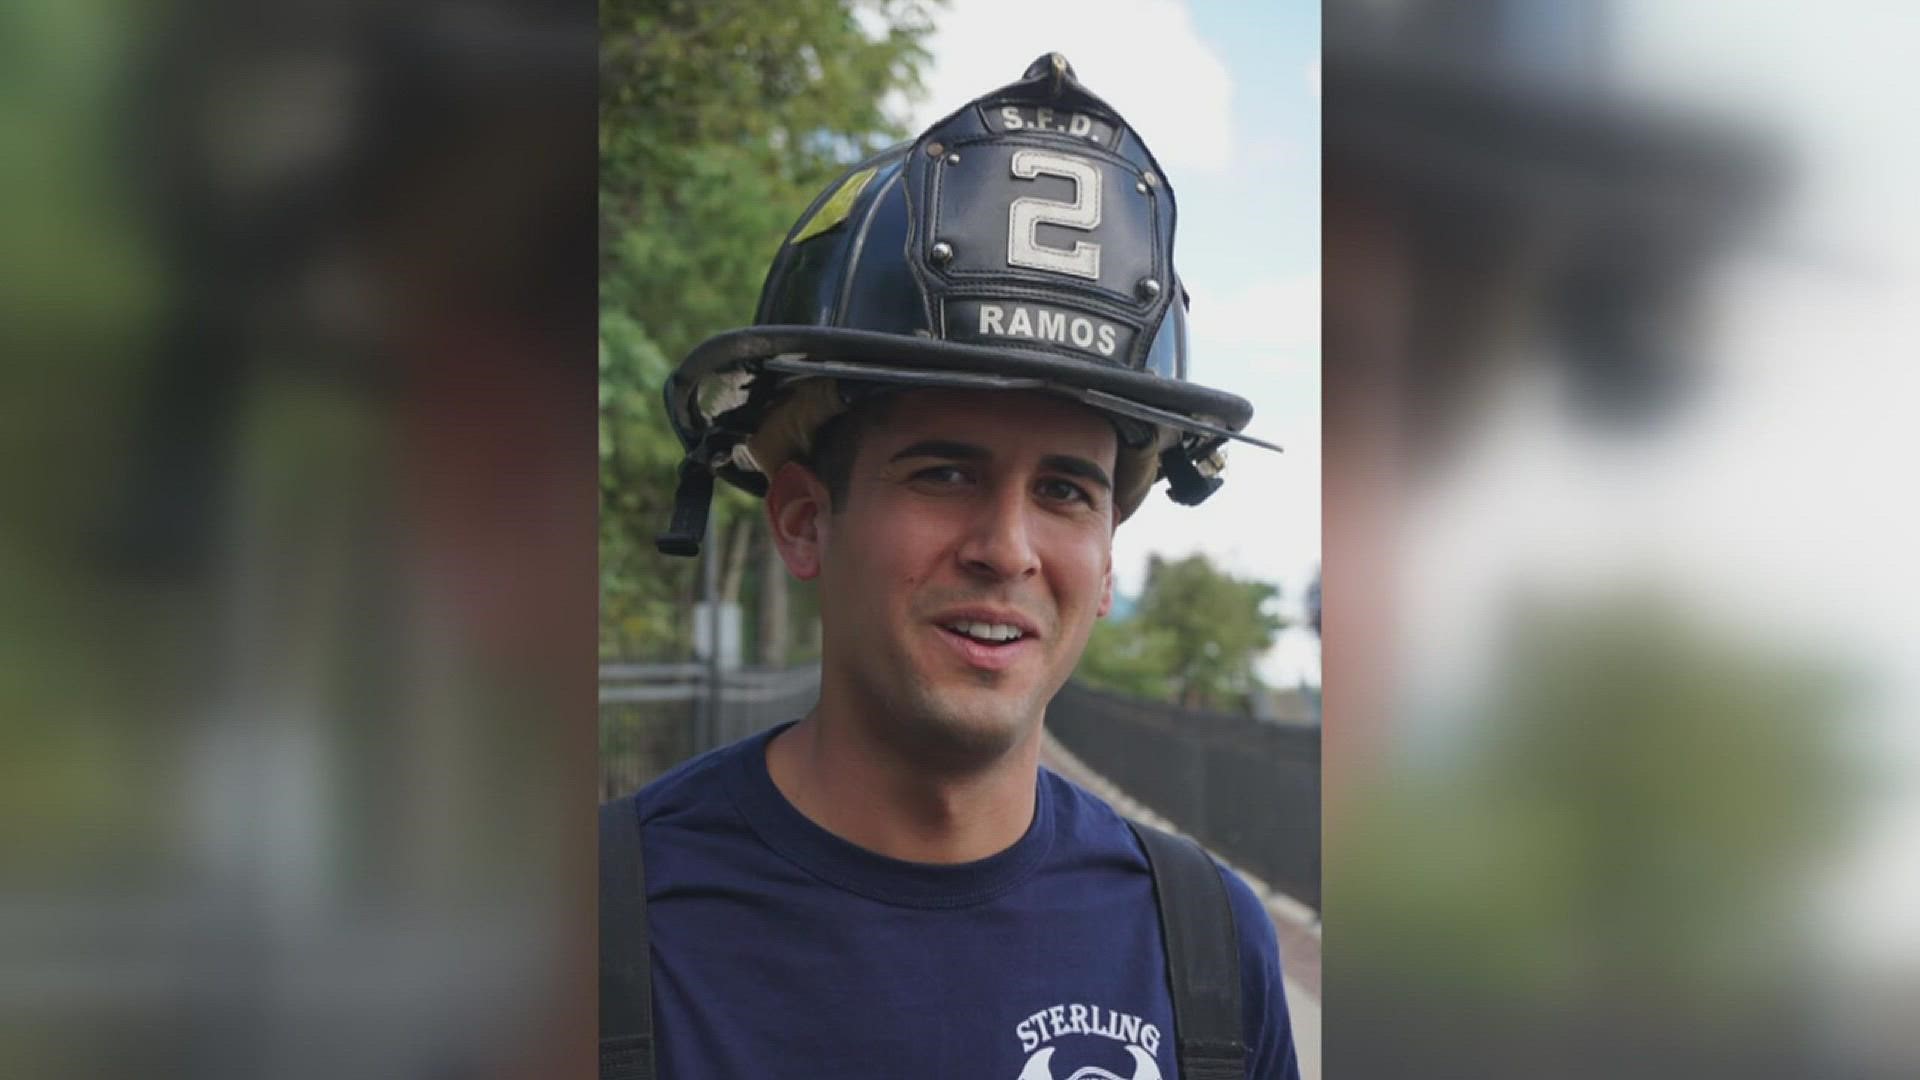 Lieutenant Garrett Ramos passed away Friday night while reporting to a fire in Rock Falls.